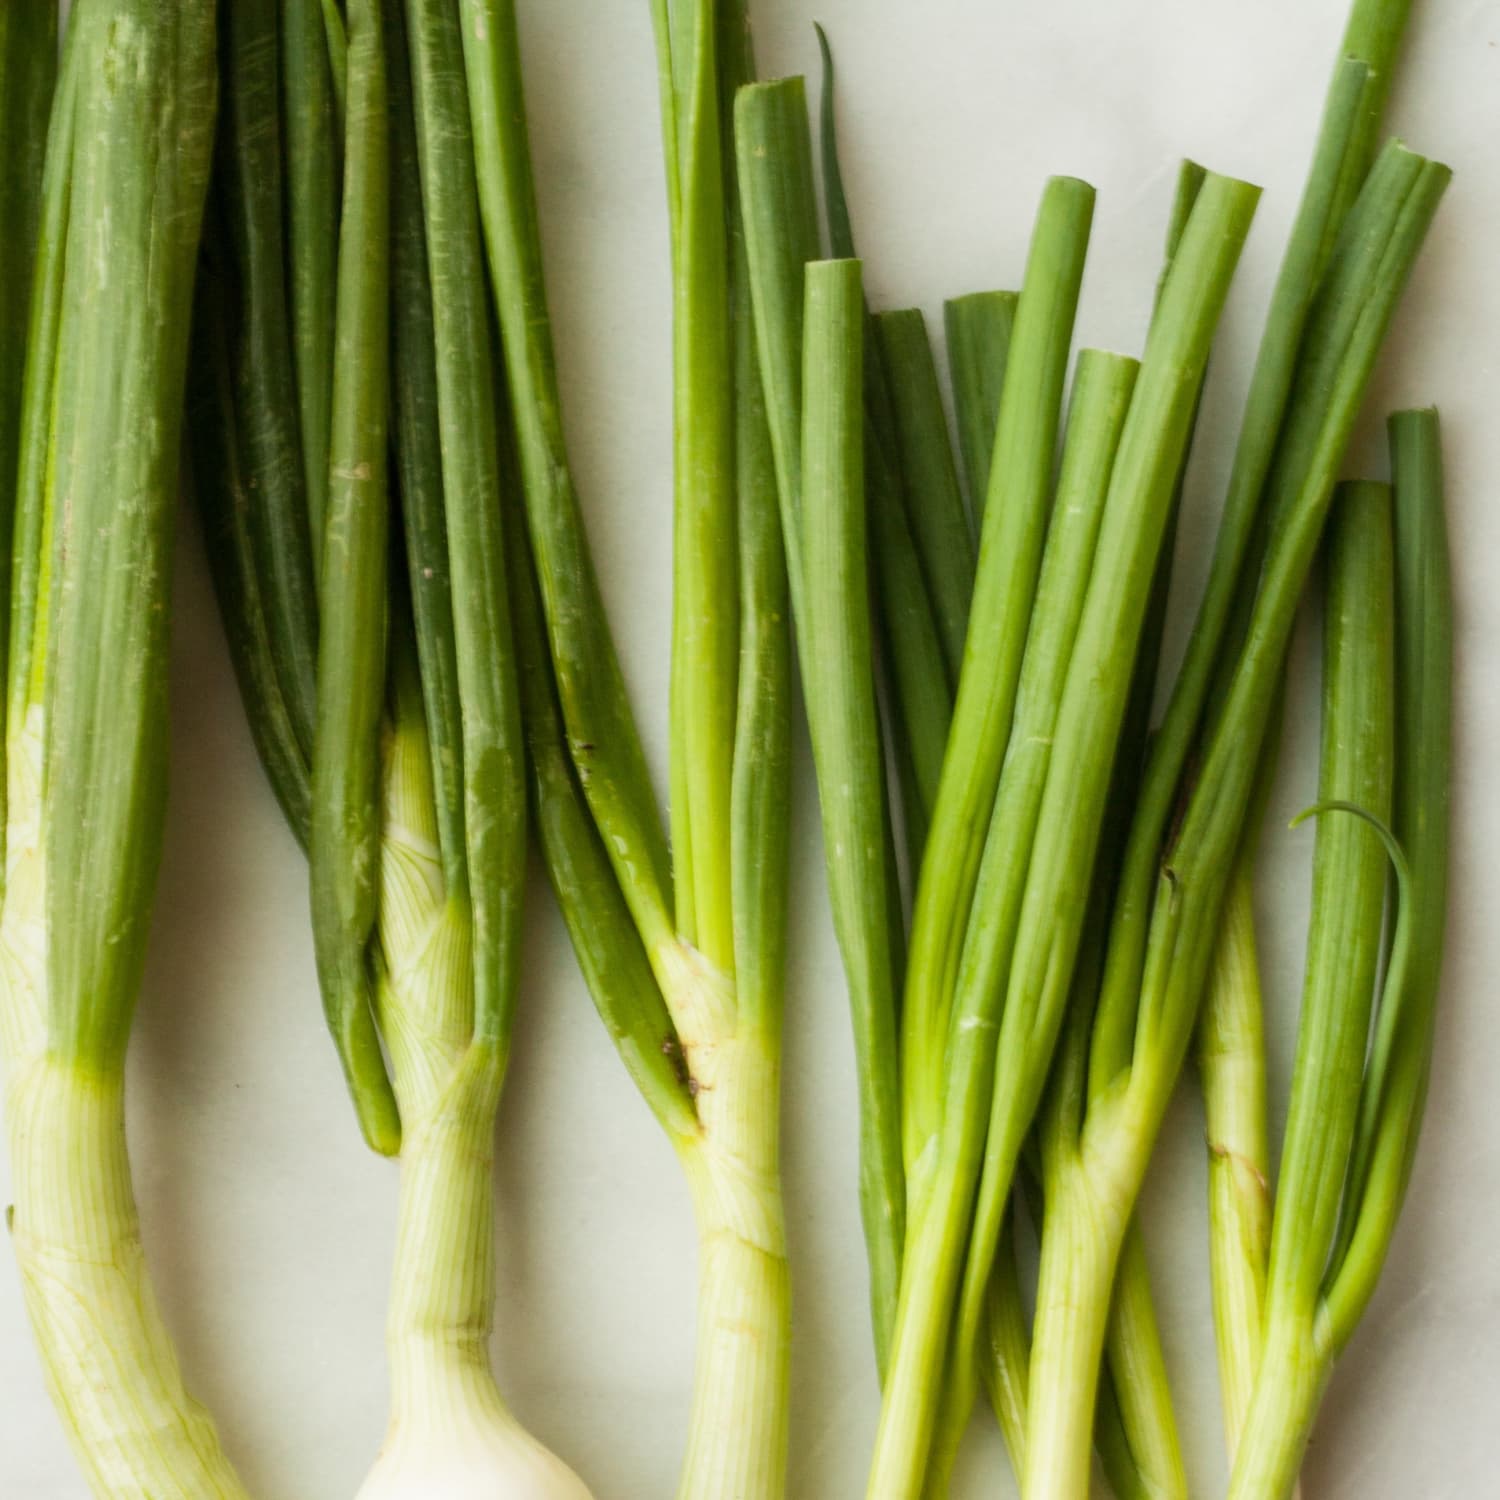 How To Store Scallions